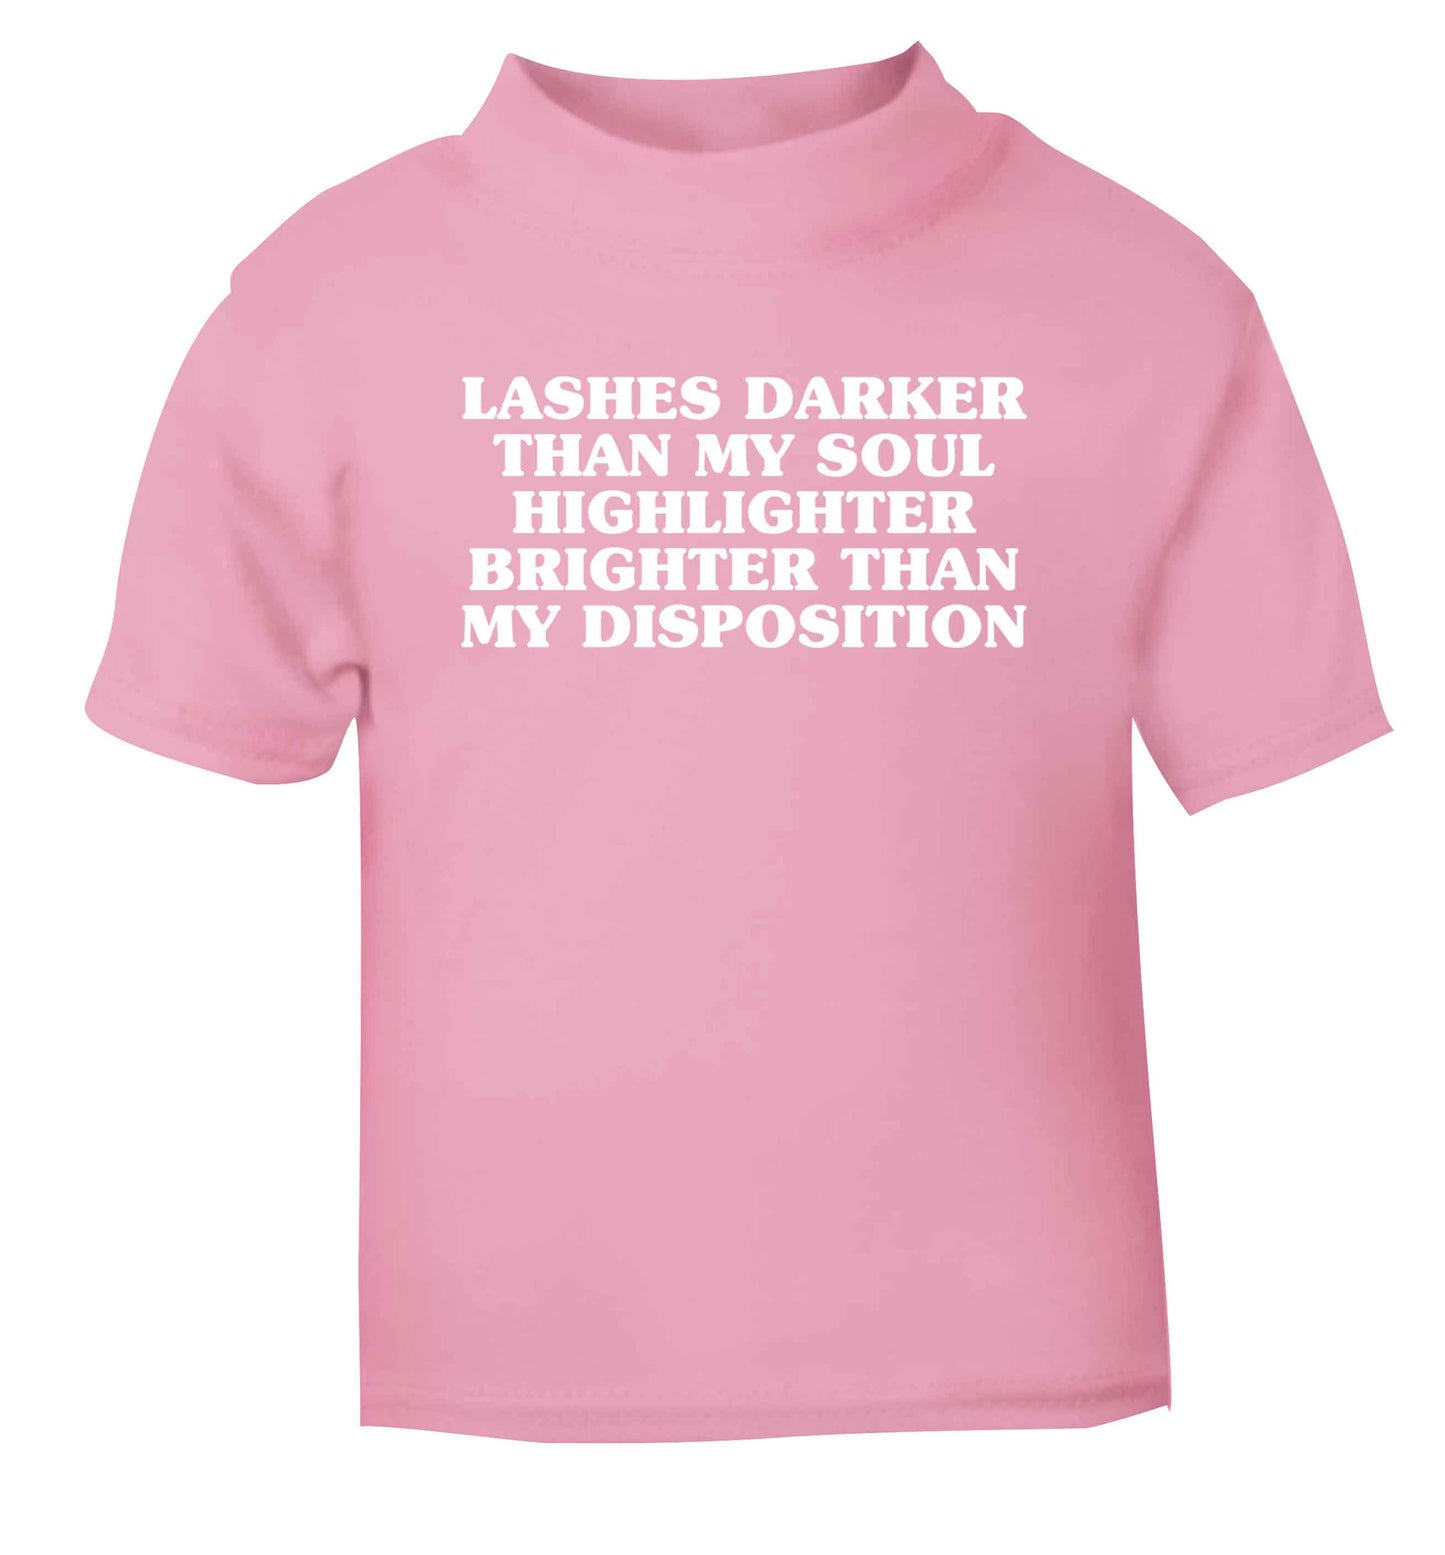 Lashes darker than my soul, highlighter brighter than my disposition light pink Baby Toddler Tshirt 2 Years